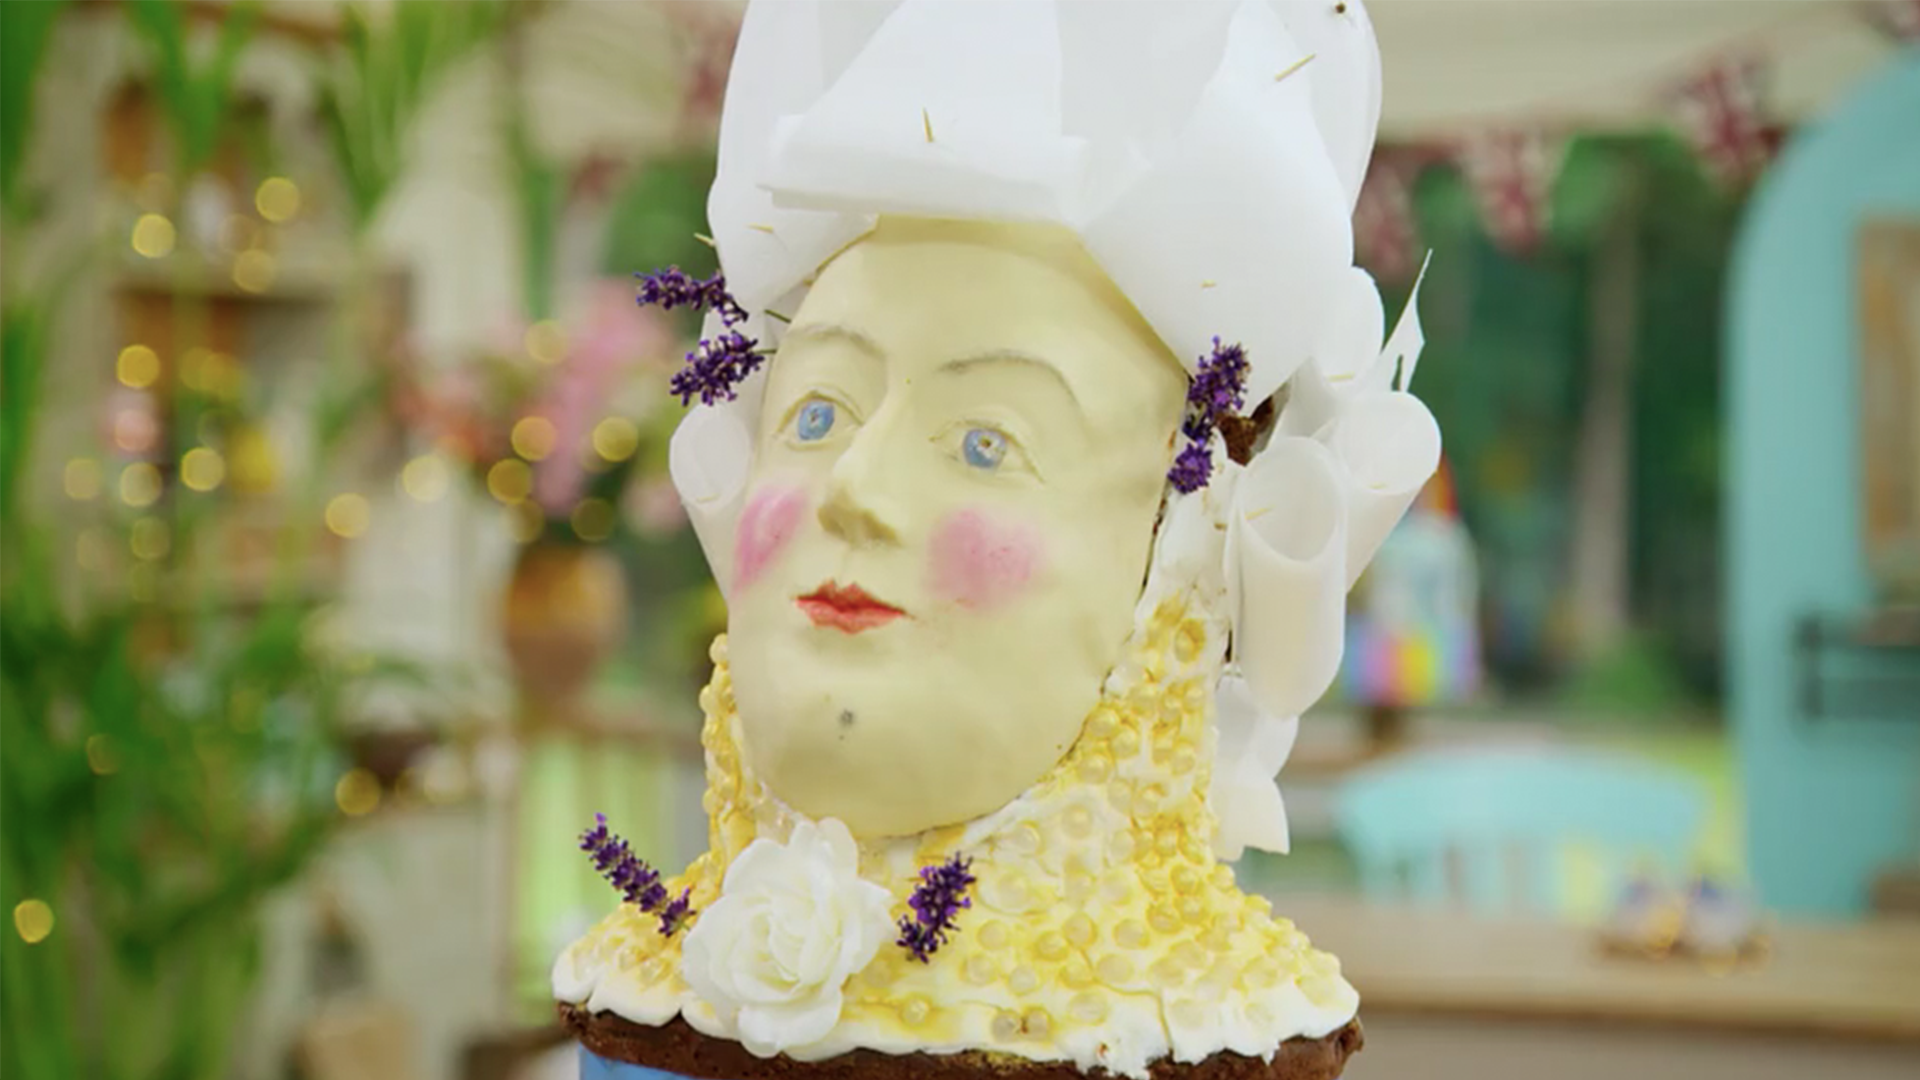 A very fancy cake made to look like a historical figure